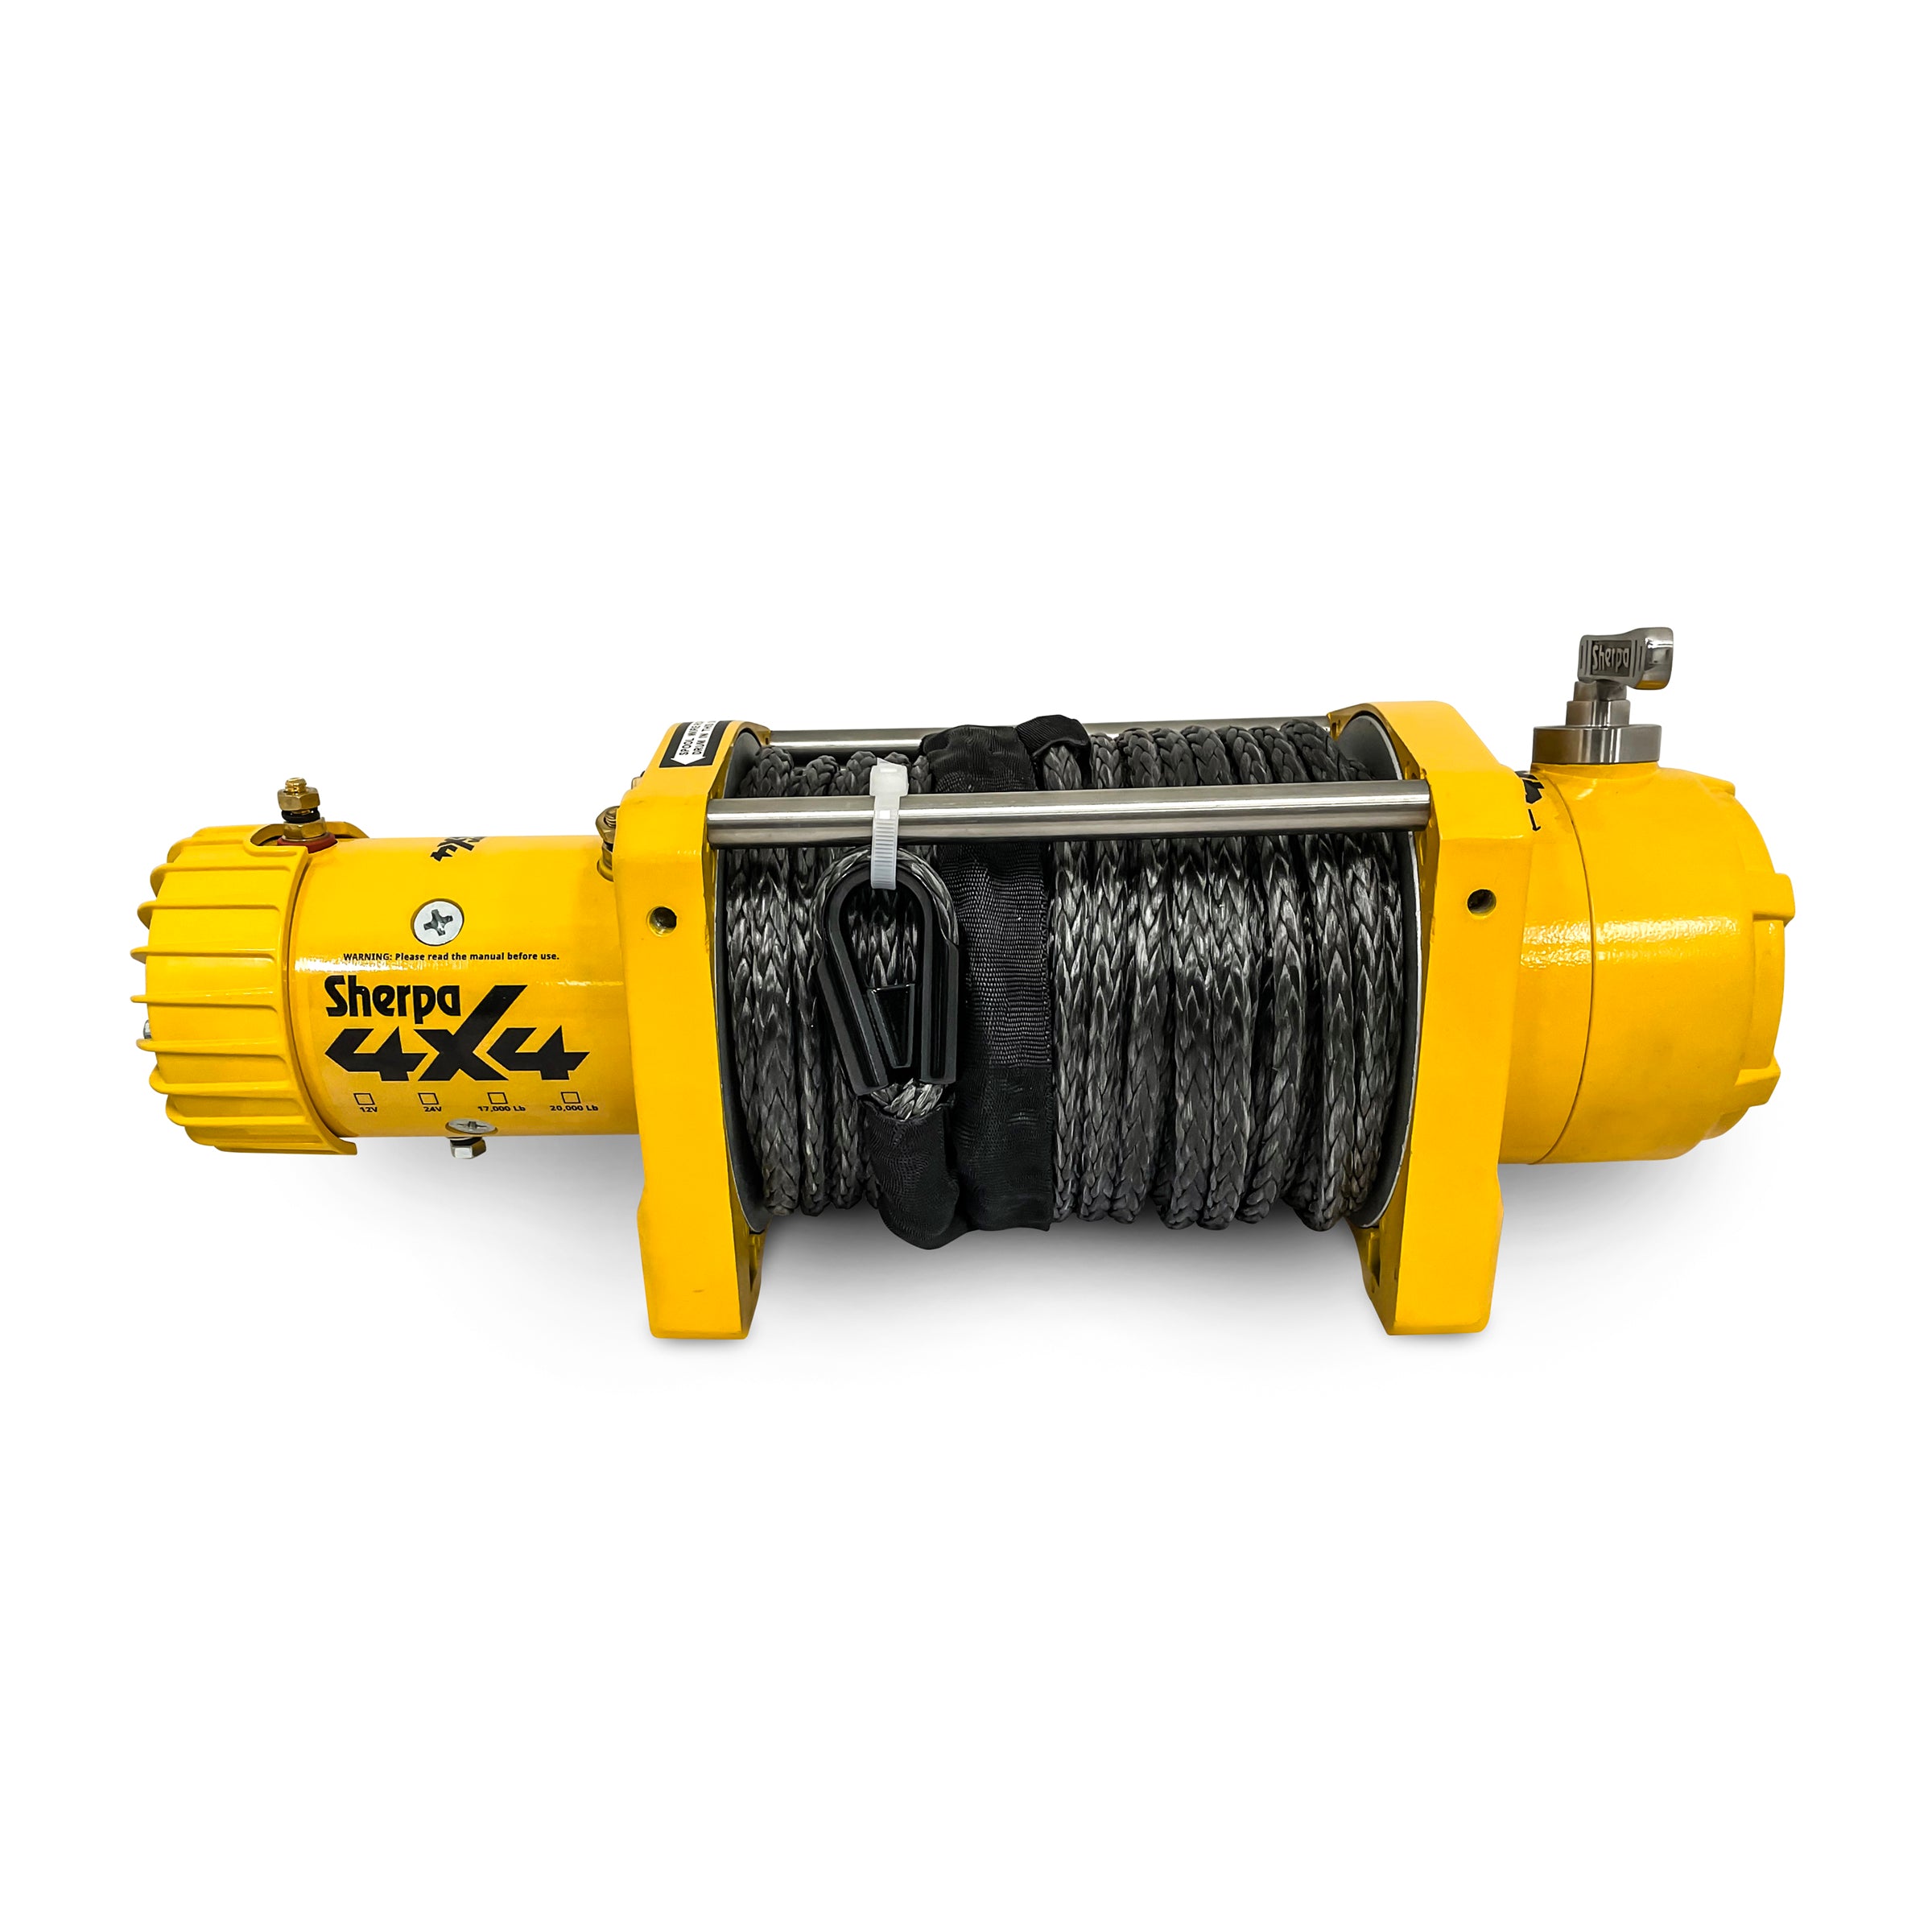 Sherpa Steed 45m rope winches